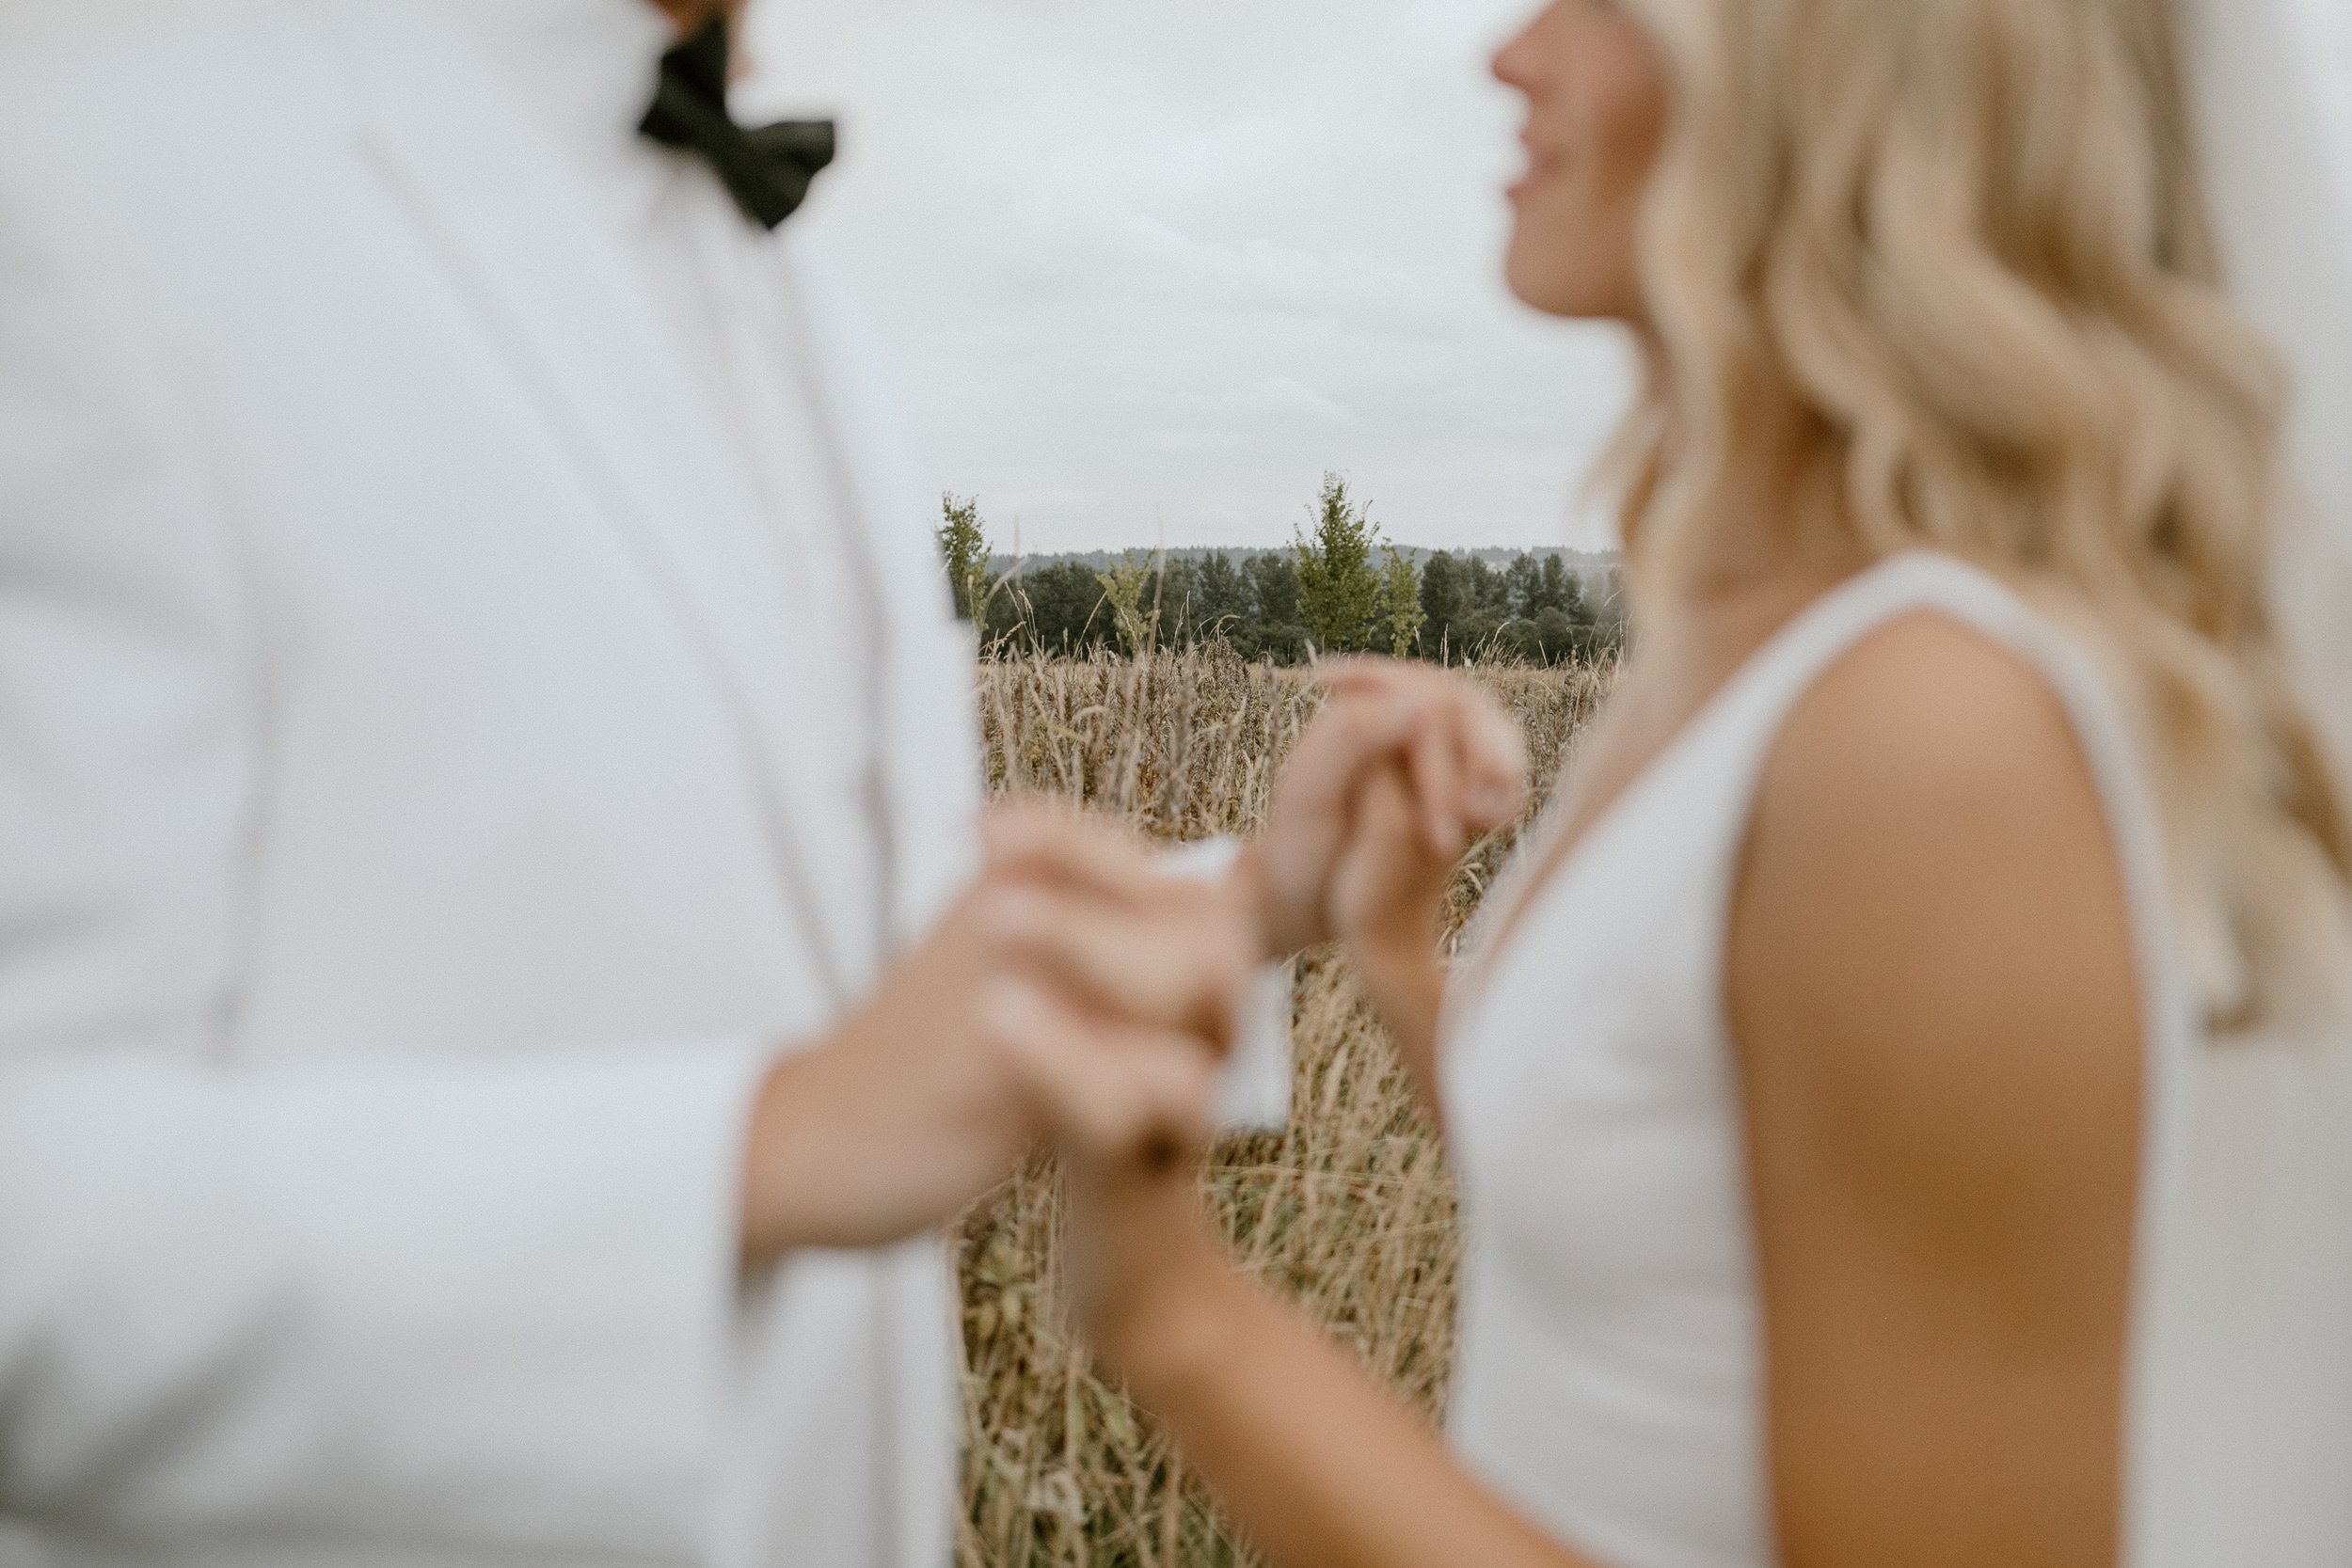  “Thank you for the beautiful wedding Farm 12 provided for our daughter. The entire staff was so helpful and accommodating. Krista, our event coordinator, met with us on several occasions and did an excellent job. We were very pleased with the setup,